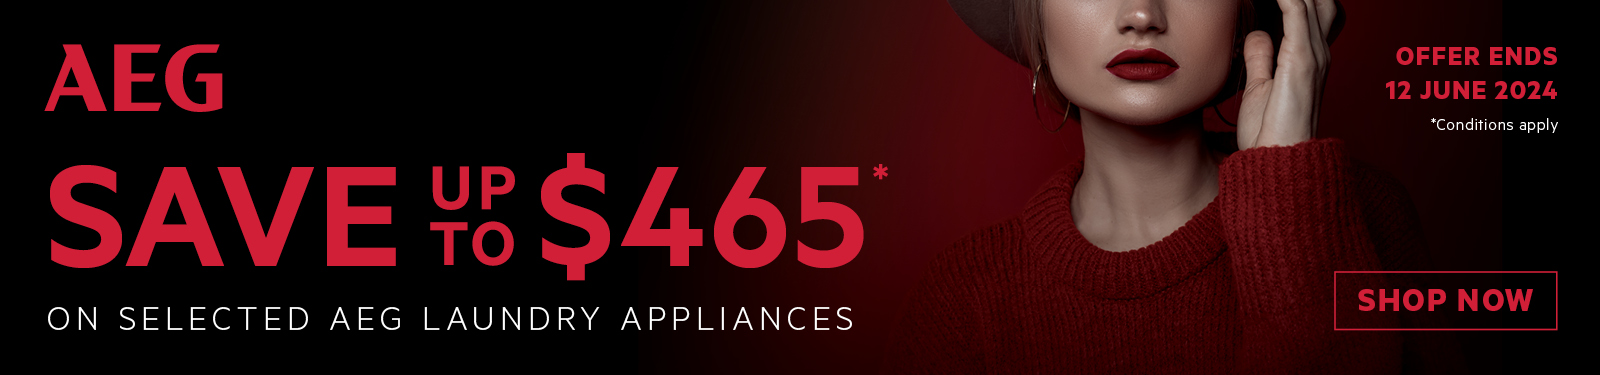 Save Up To $465 On Selected AEG Laundry Appliances at Retravision